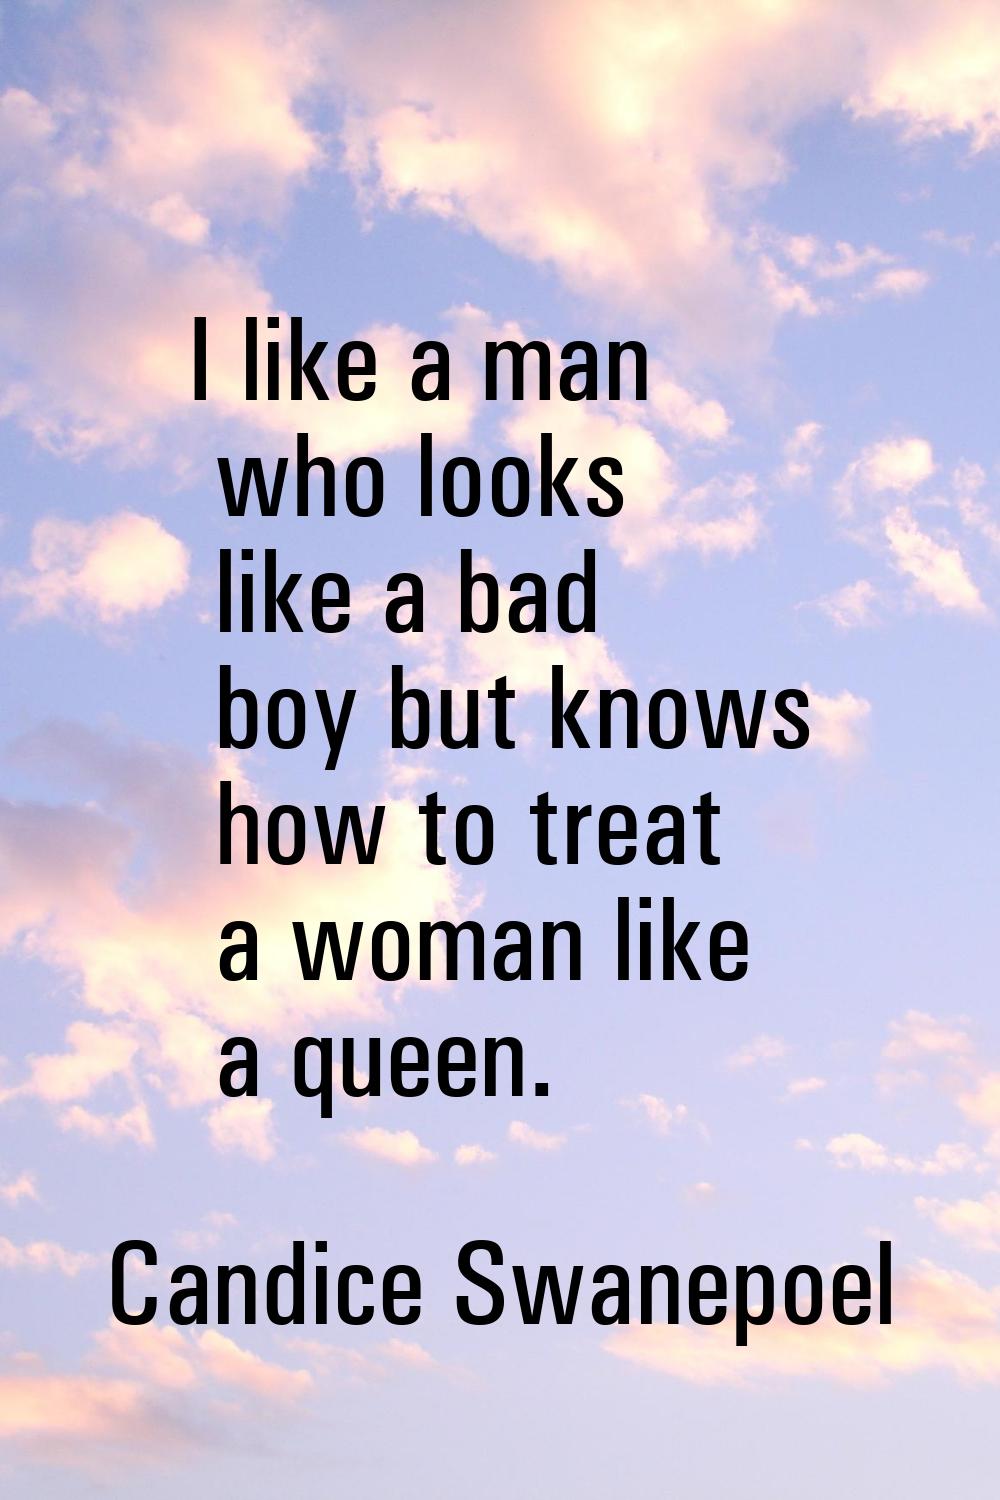 I like a man who looks like a bad boy but knows how to treat a woman like a queen.